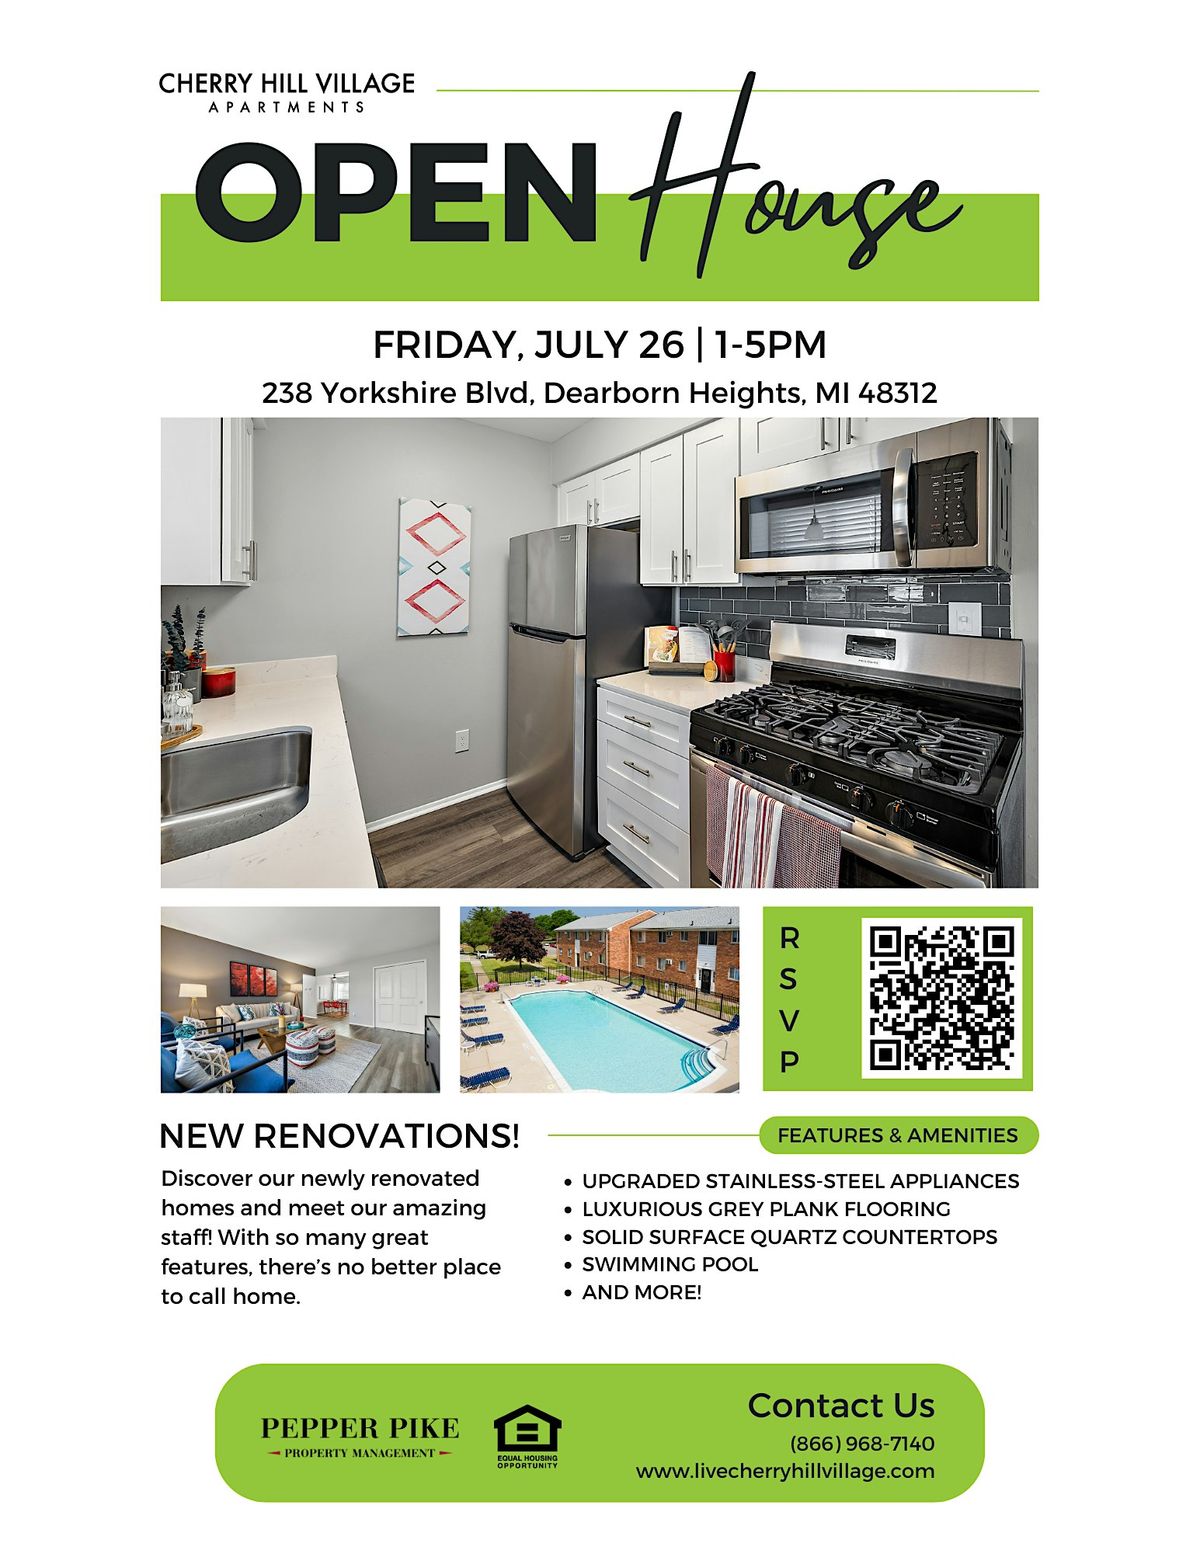 Cherry Hill Village Apartments Open House